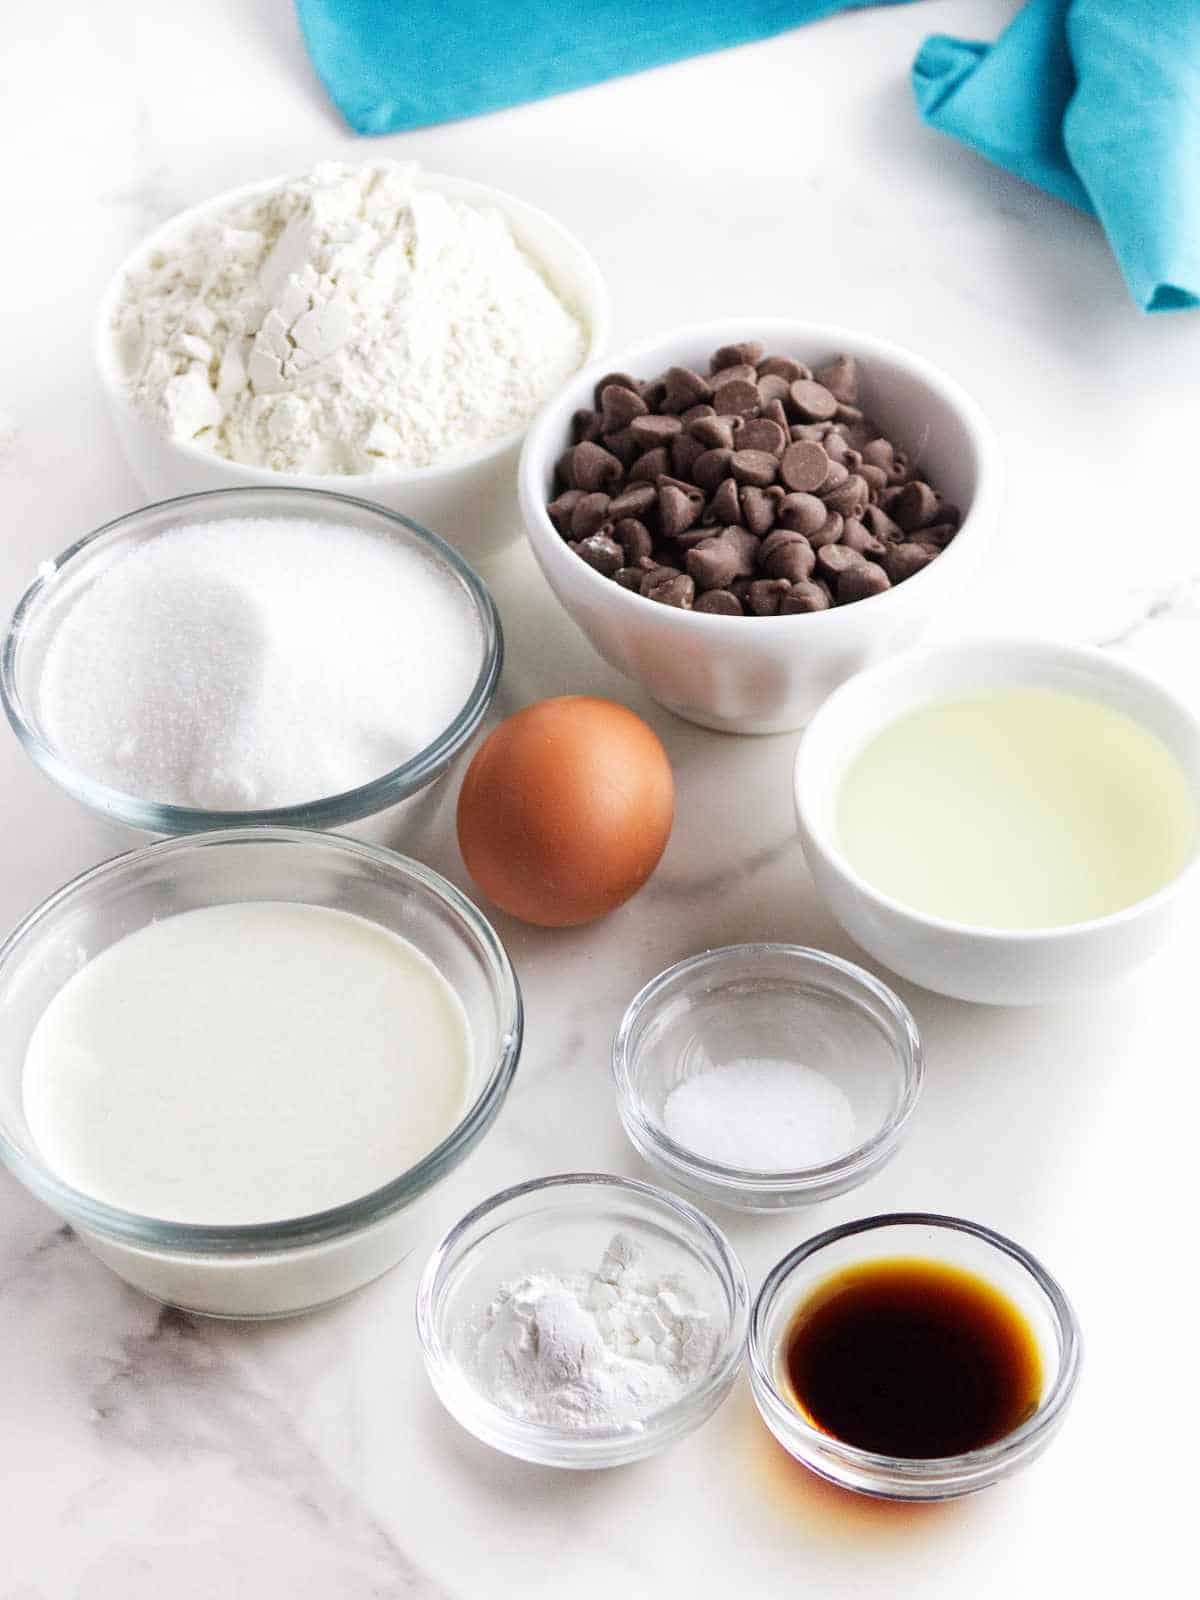 ingredients for chocolate chip muffins.